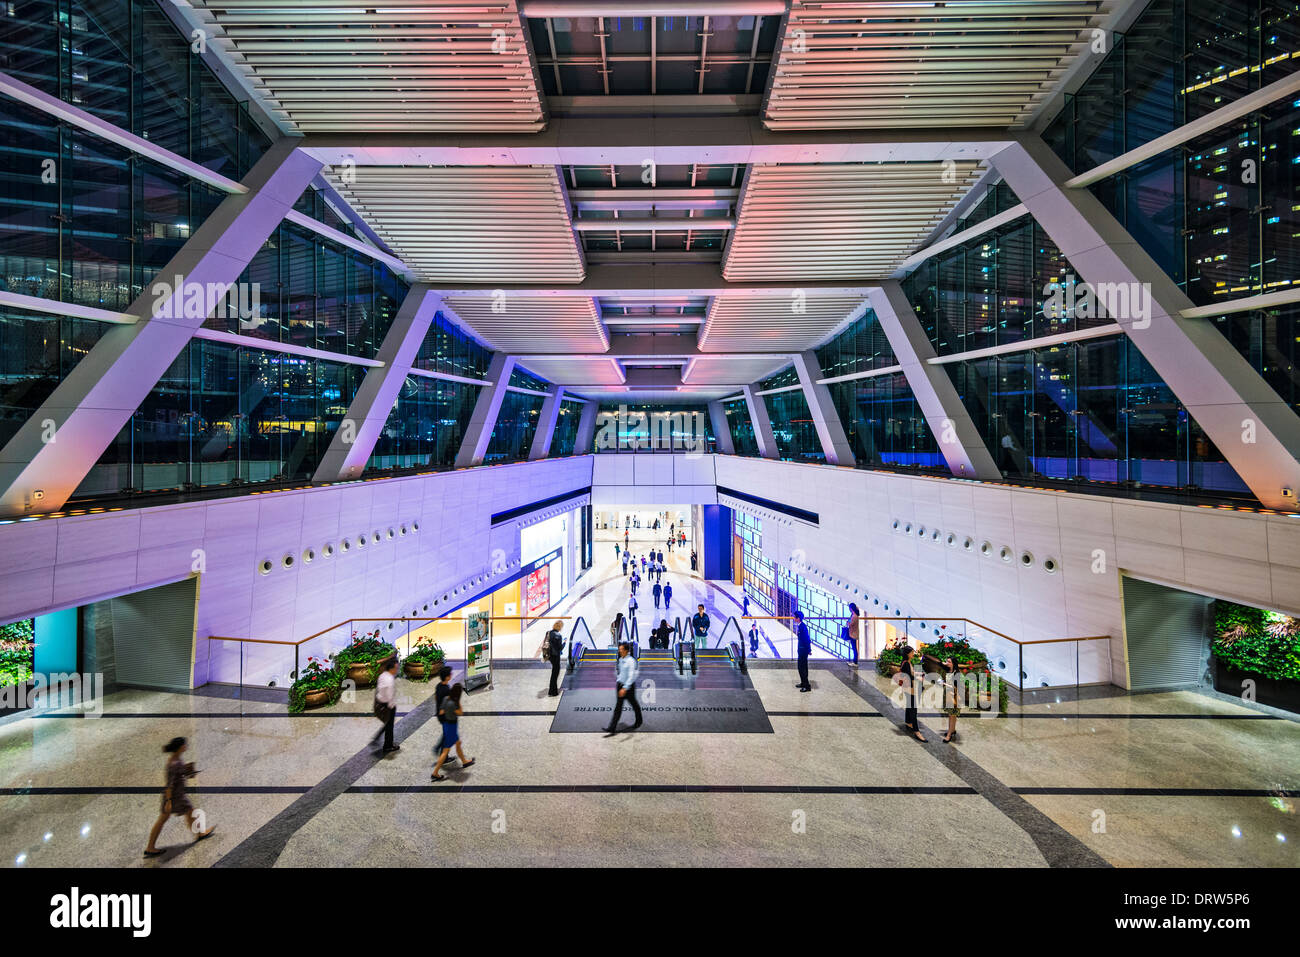 International Commerce Building connecting to Kowloon Station in Hong Kong, China. Stock Photo